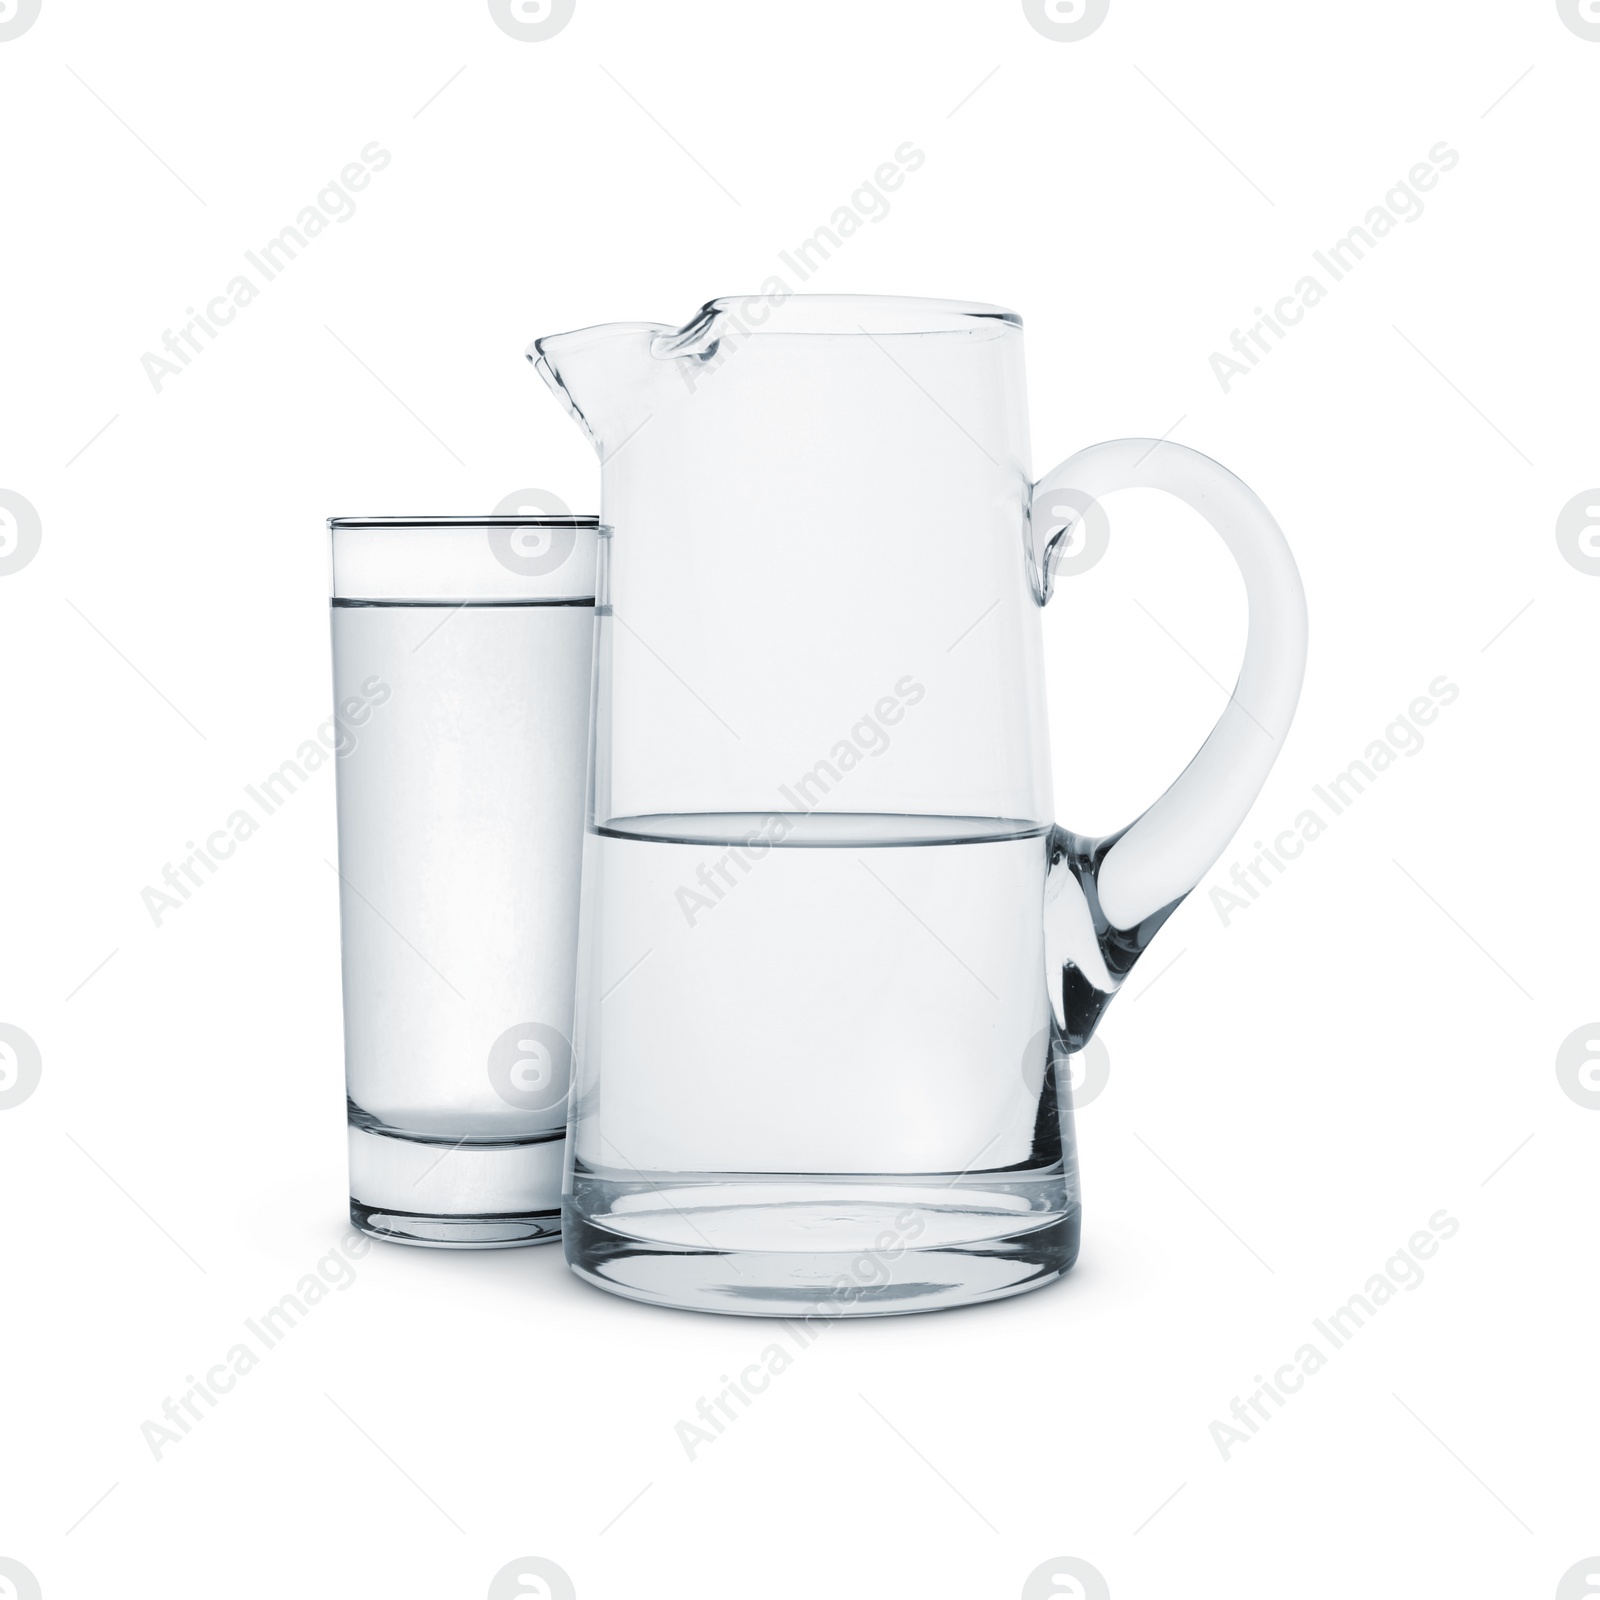 Image of Glass and jug with water isolated on white